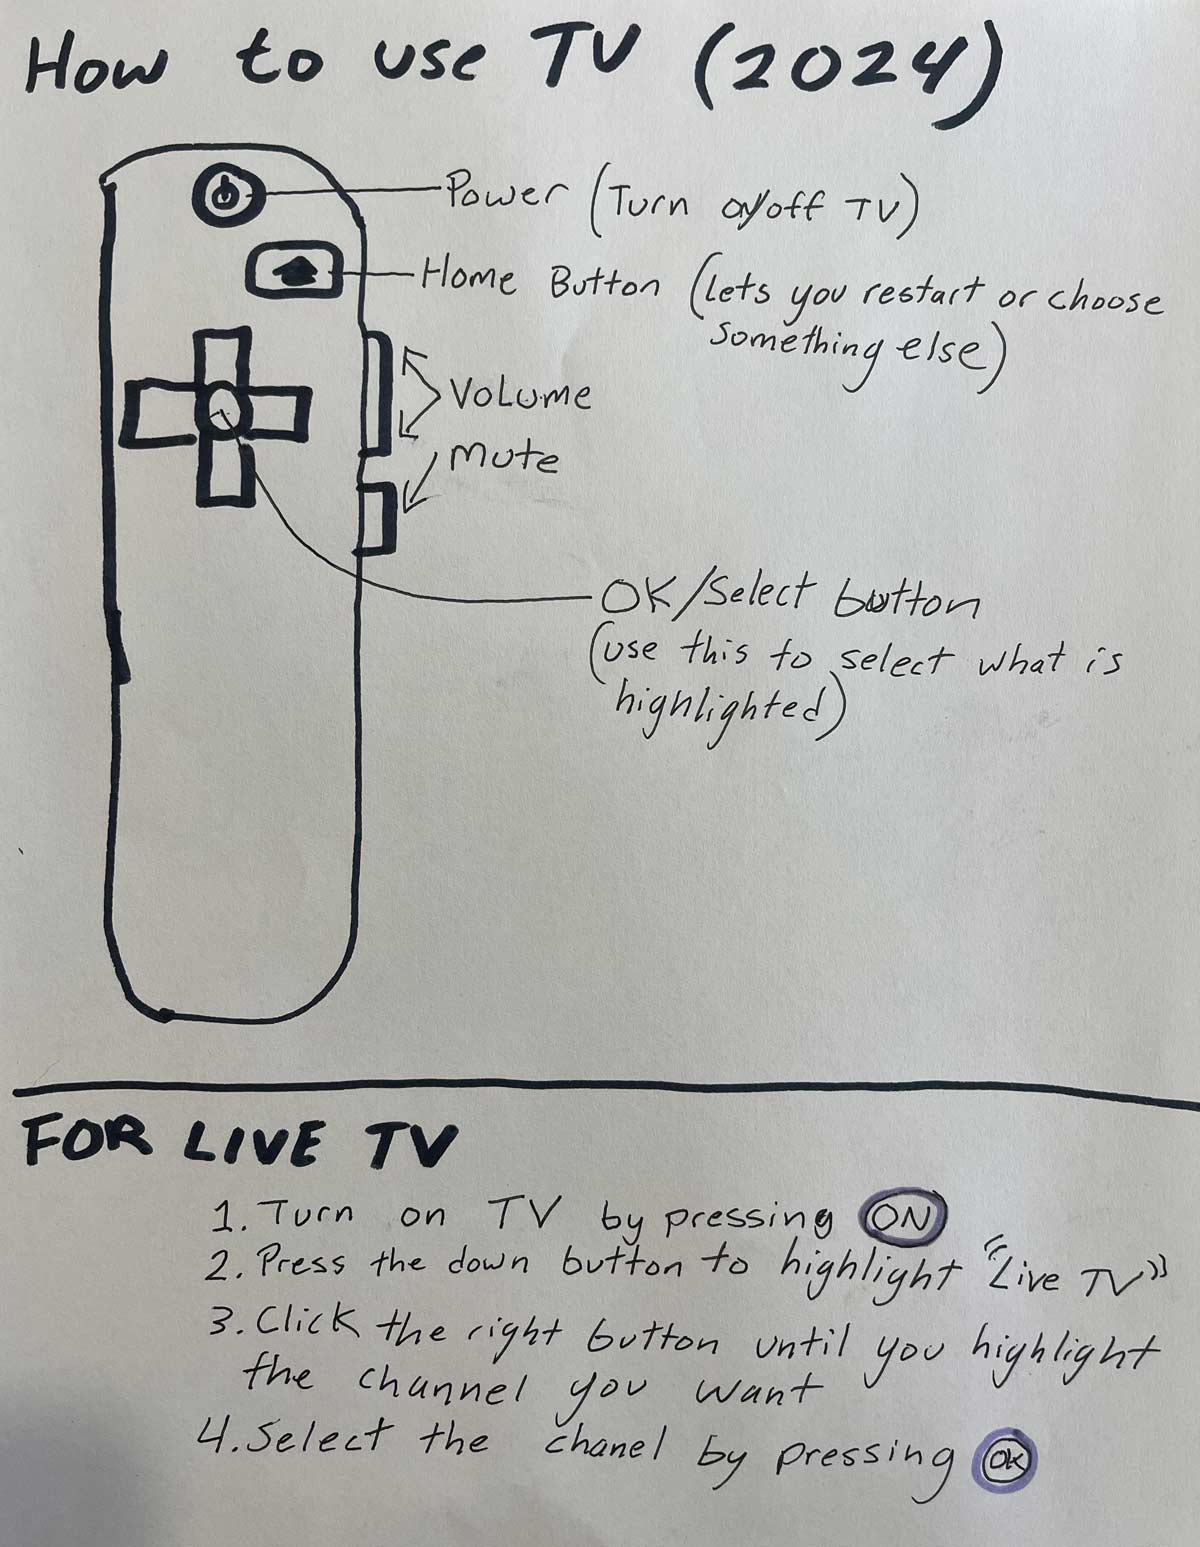 The guide I had to create for my grandpa to explain to him how to use a Roku TV